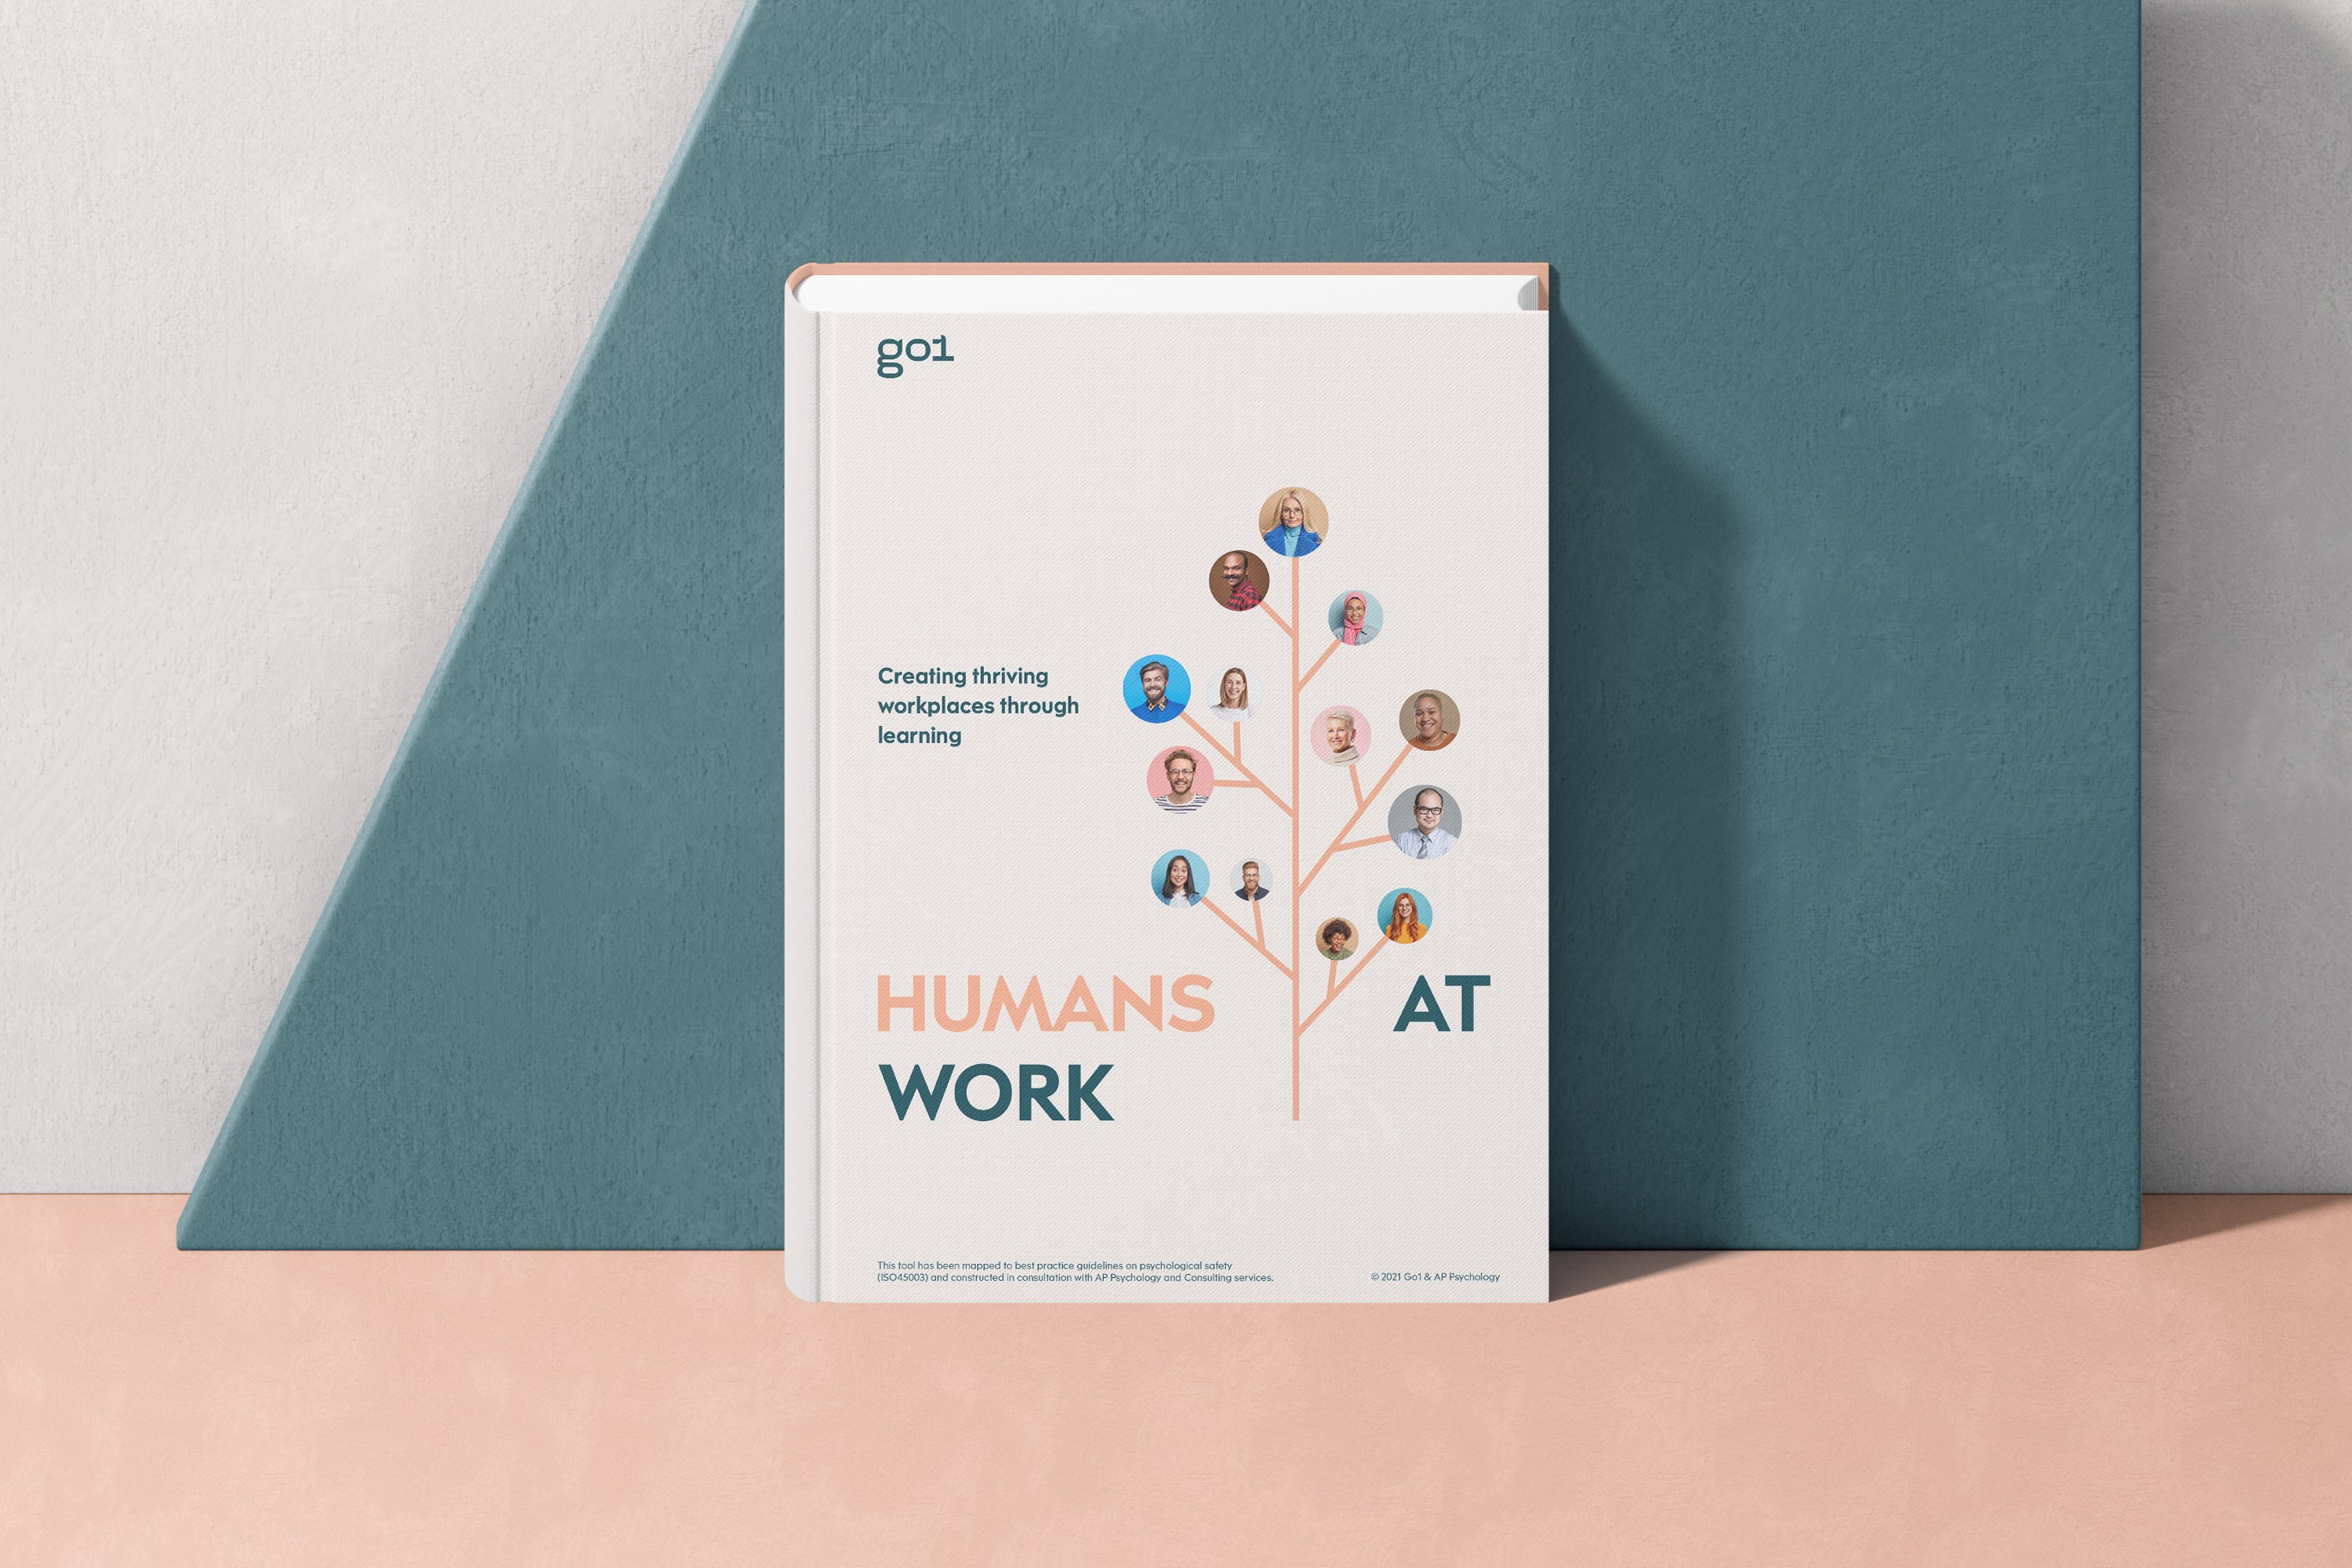 The Humans at Work guide